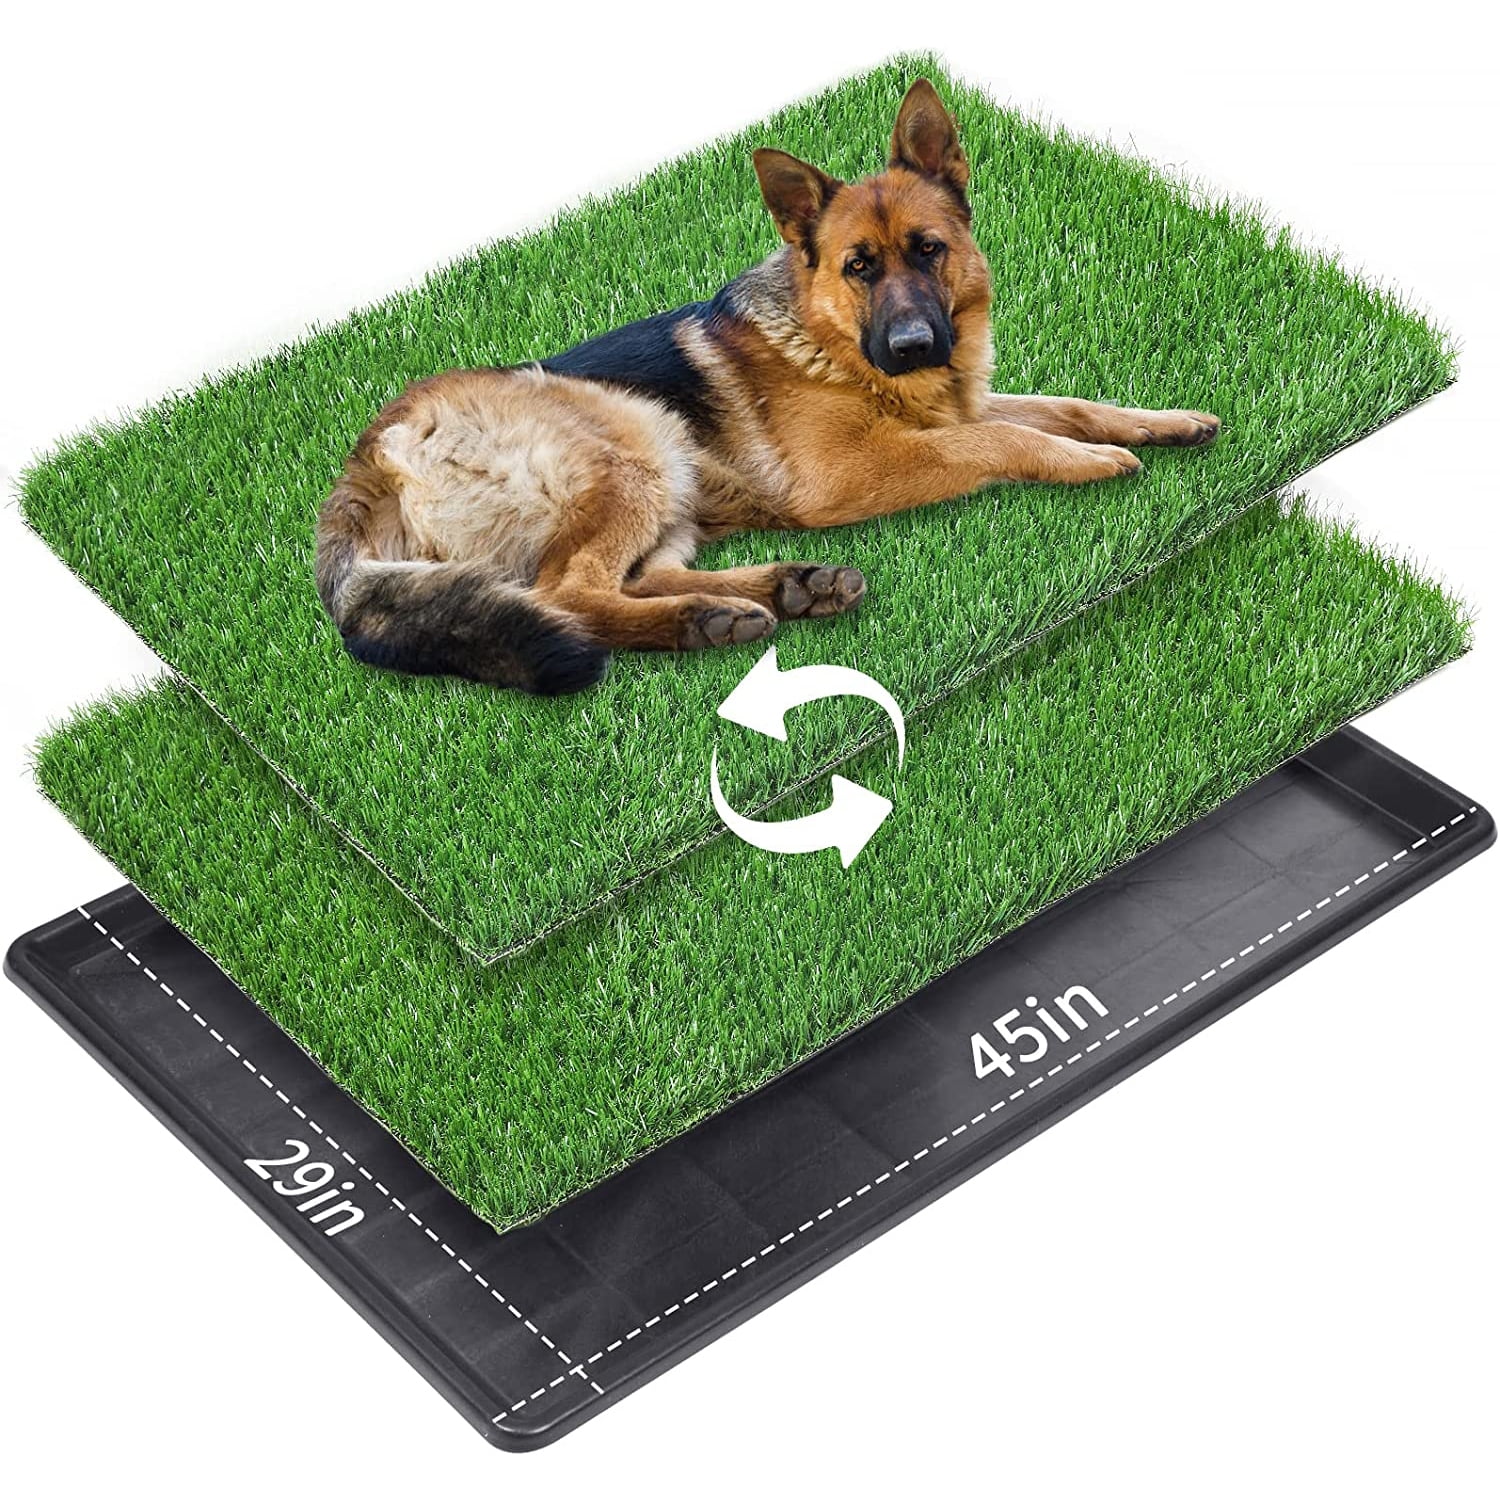 Dog Grass Pad With Tray, Artificial Grass Mats Washable Grass Pee Pads For  Dogs, Pet Toilet Potty Tray For Puppy & Small Pet, Dogs Turf Potty Training